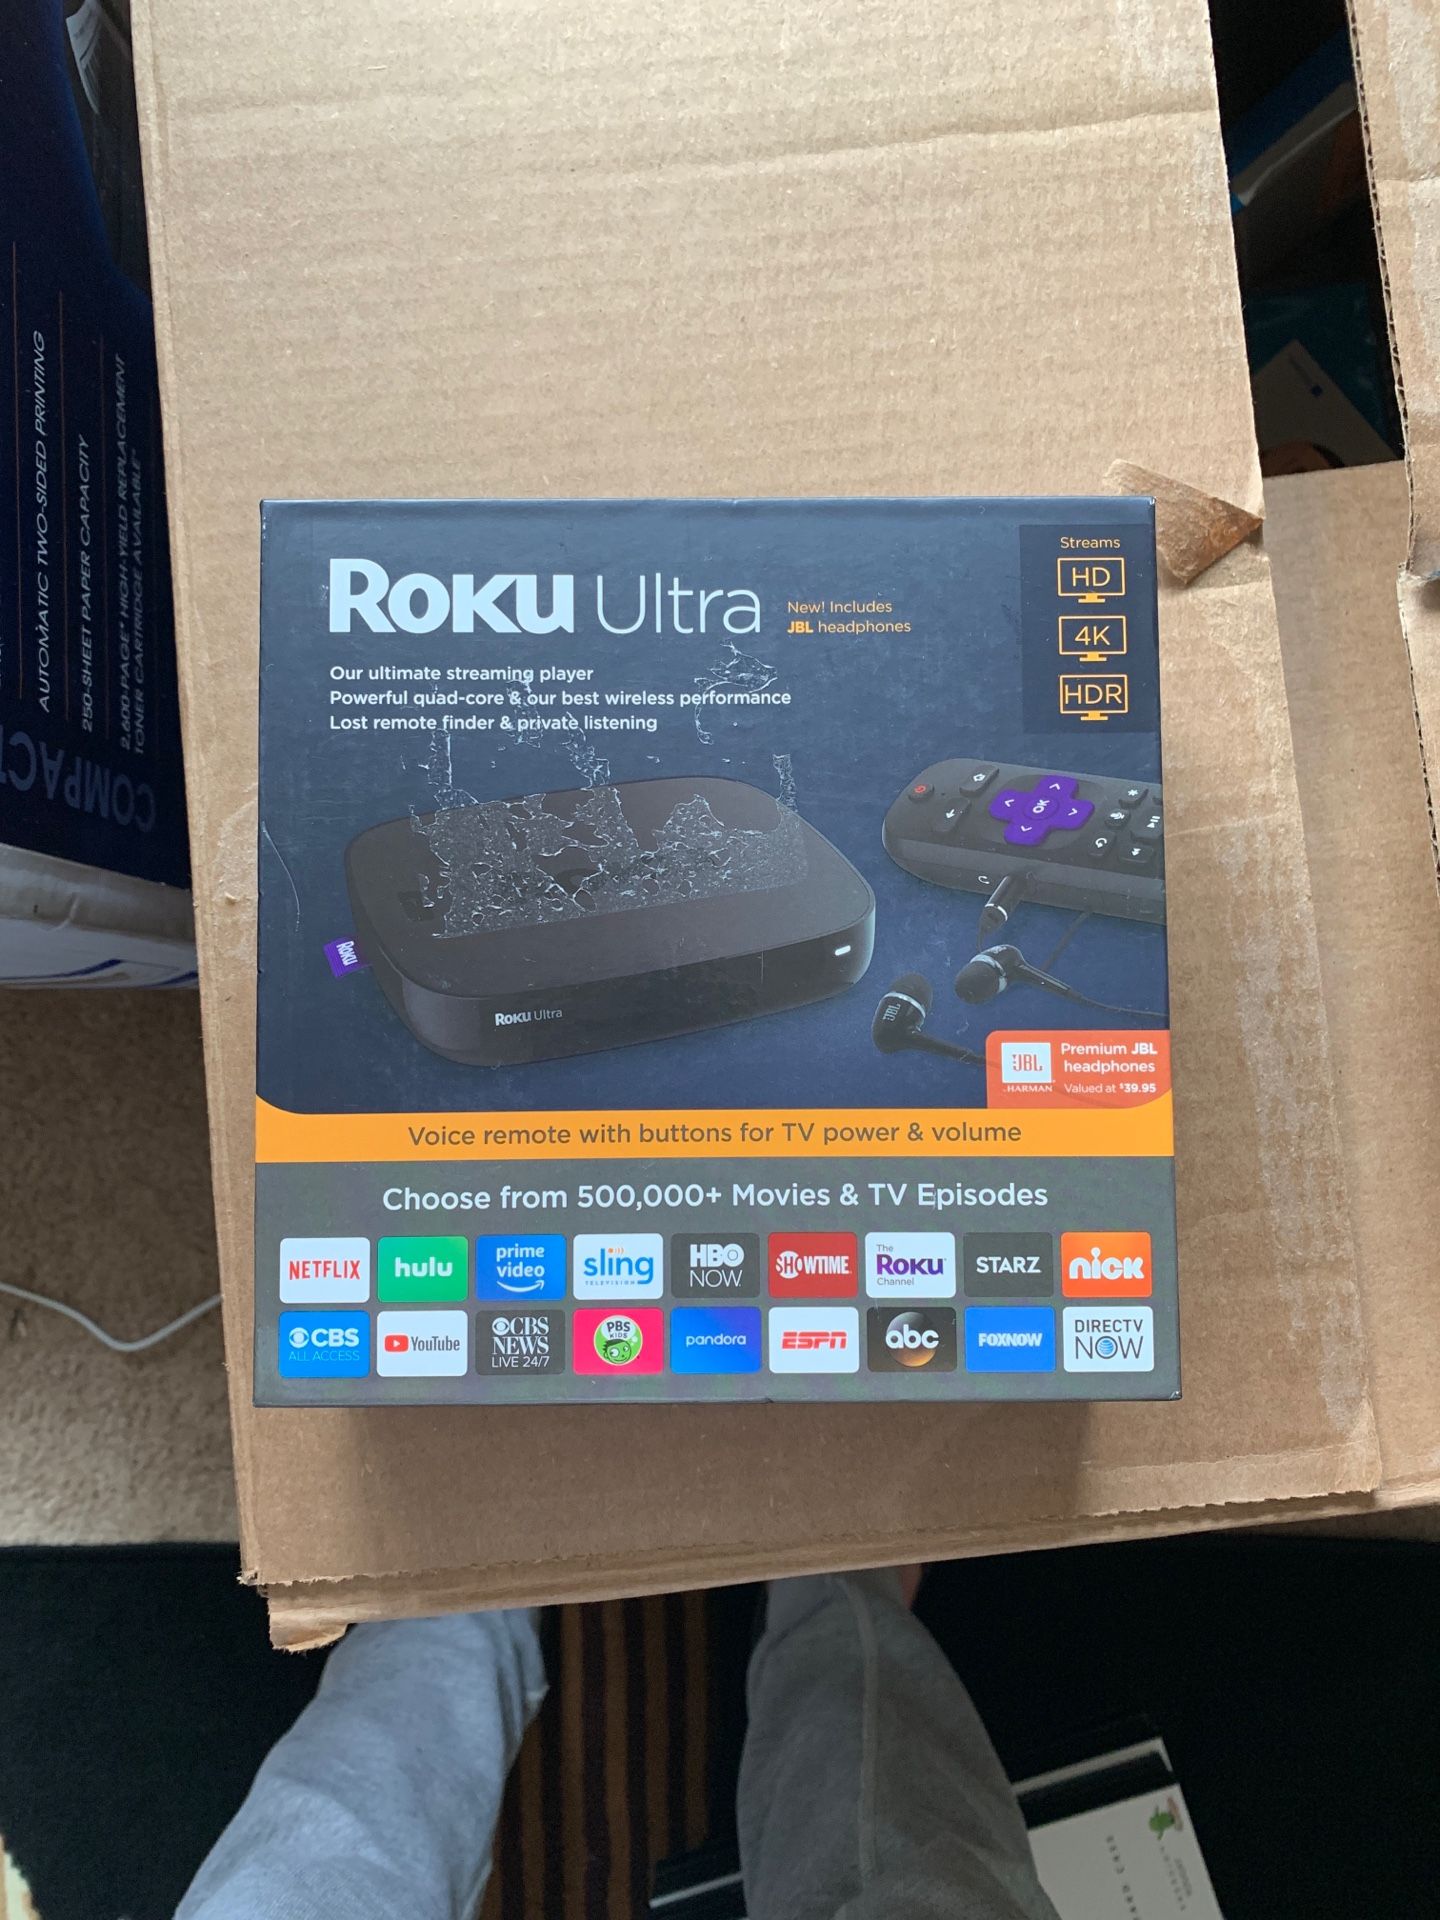 Roku Ultra | HD/4K/HDR Streaming Media Player Voice Remote, Remote Finder & USB. Now includes Premium JBL Headphones. (2018)